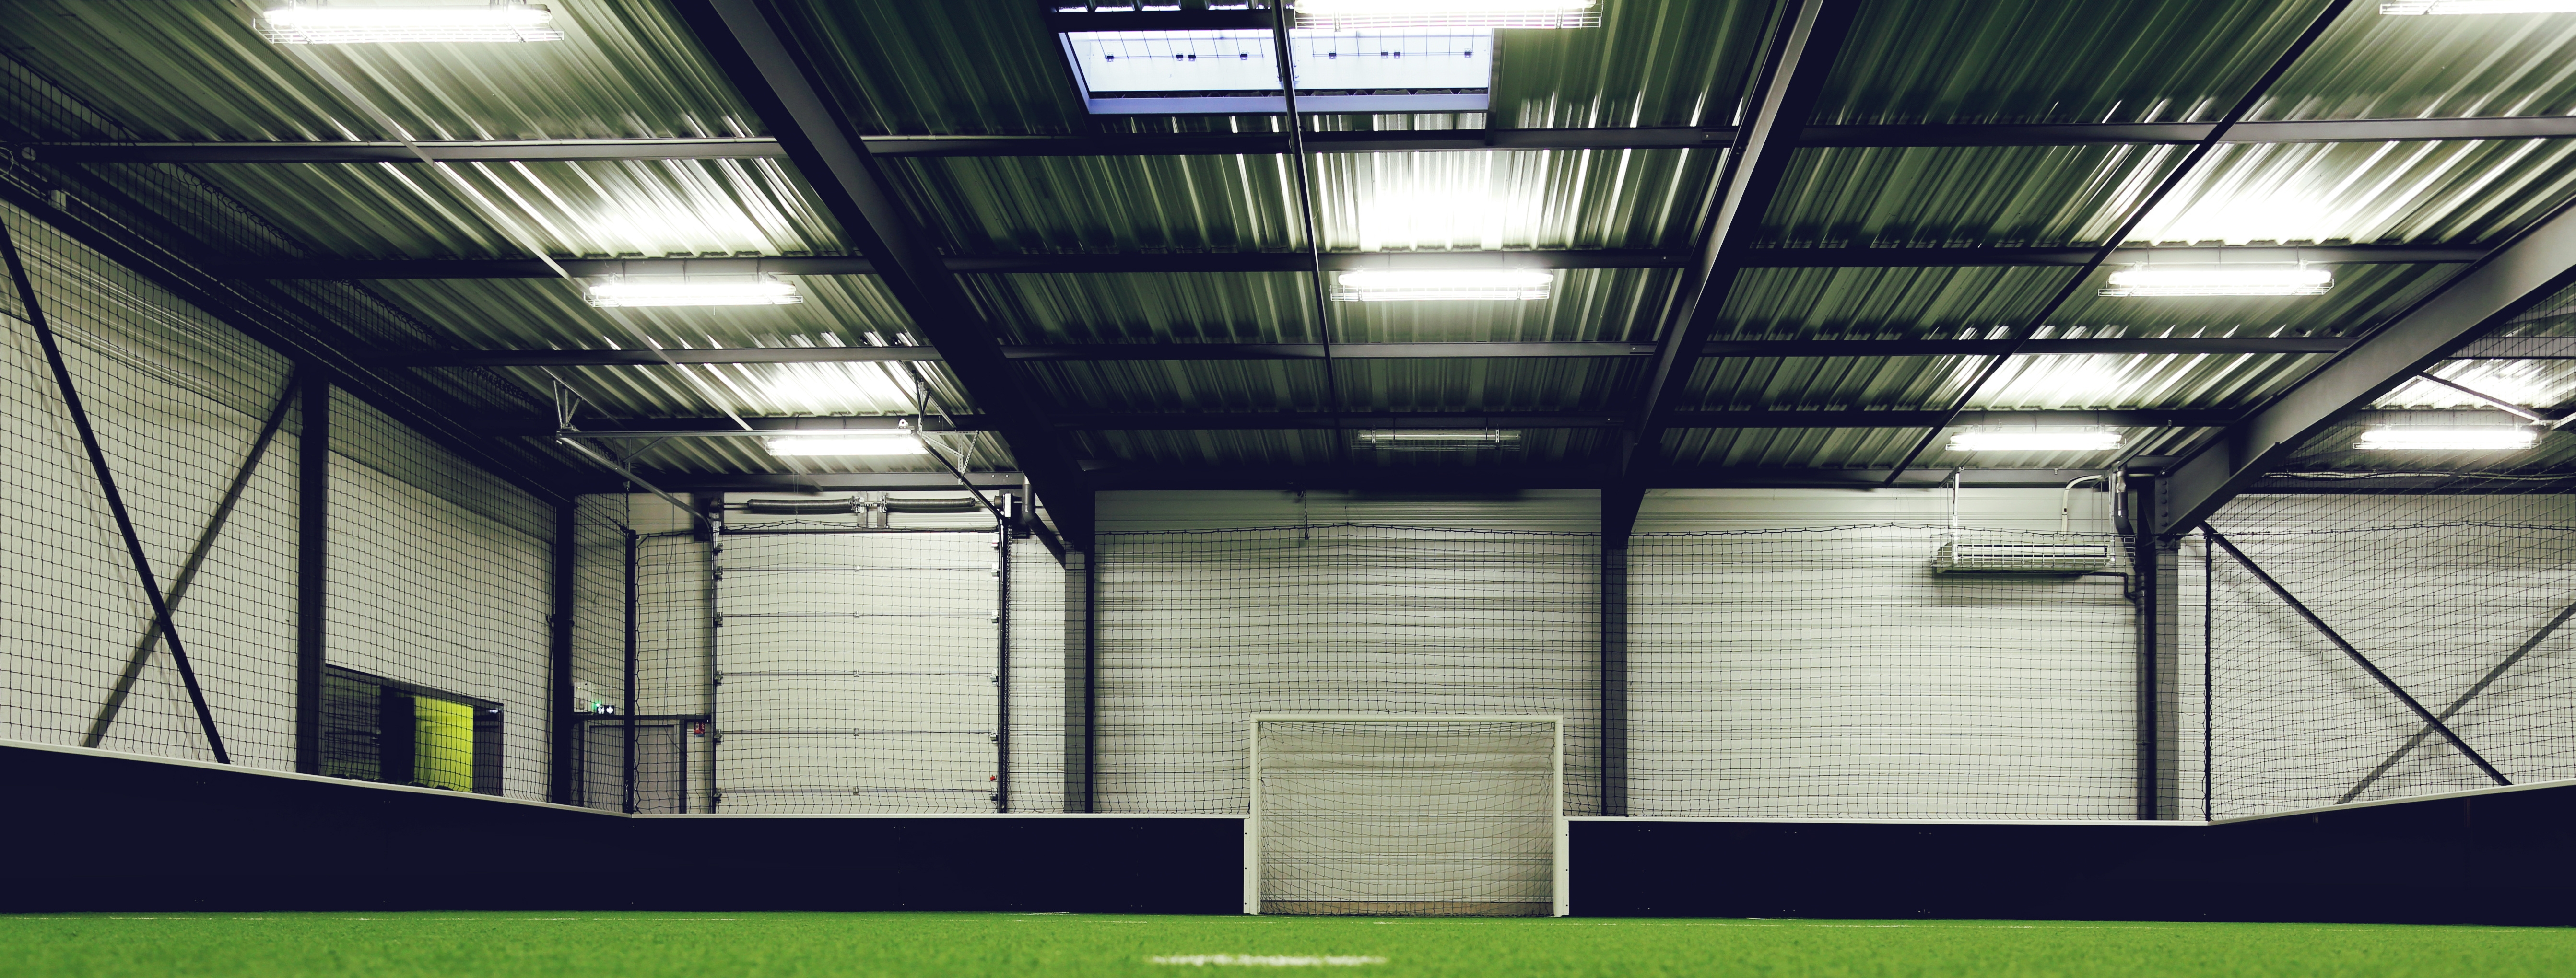 LED Panel Lighting Over Steel Sports Facility Field